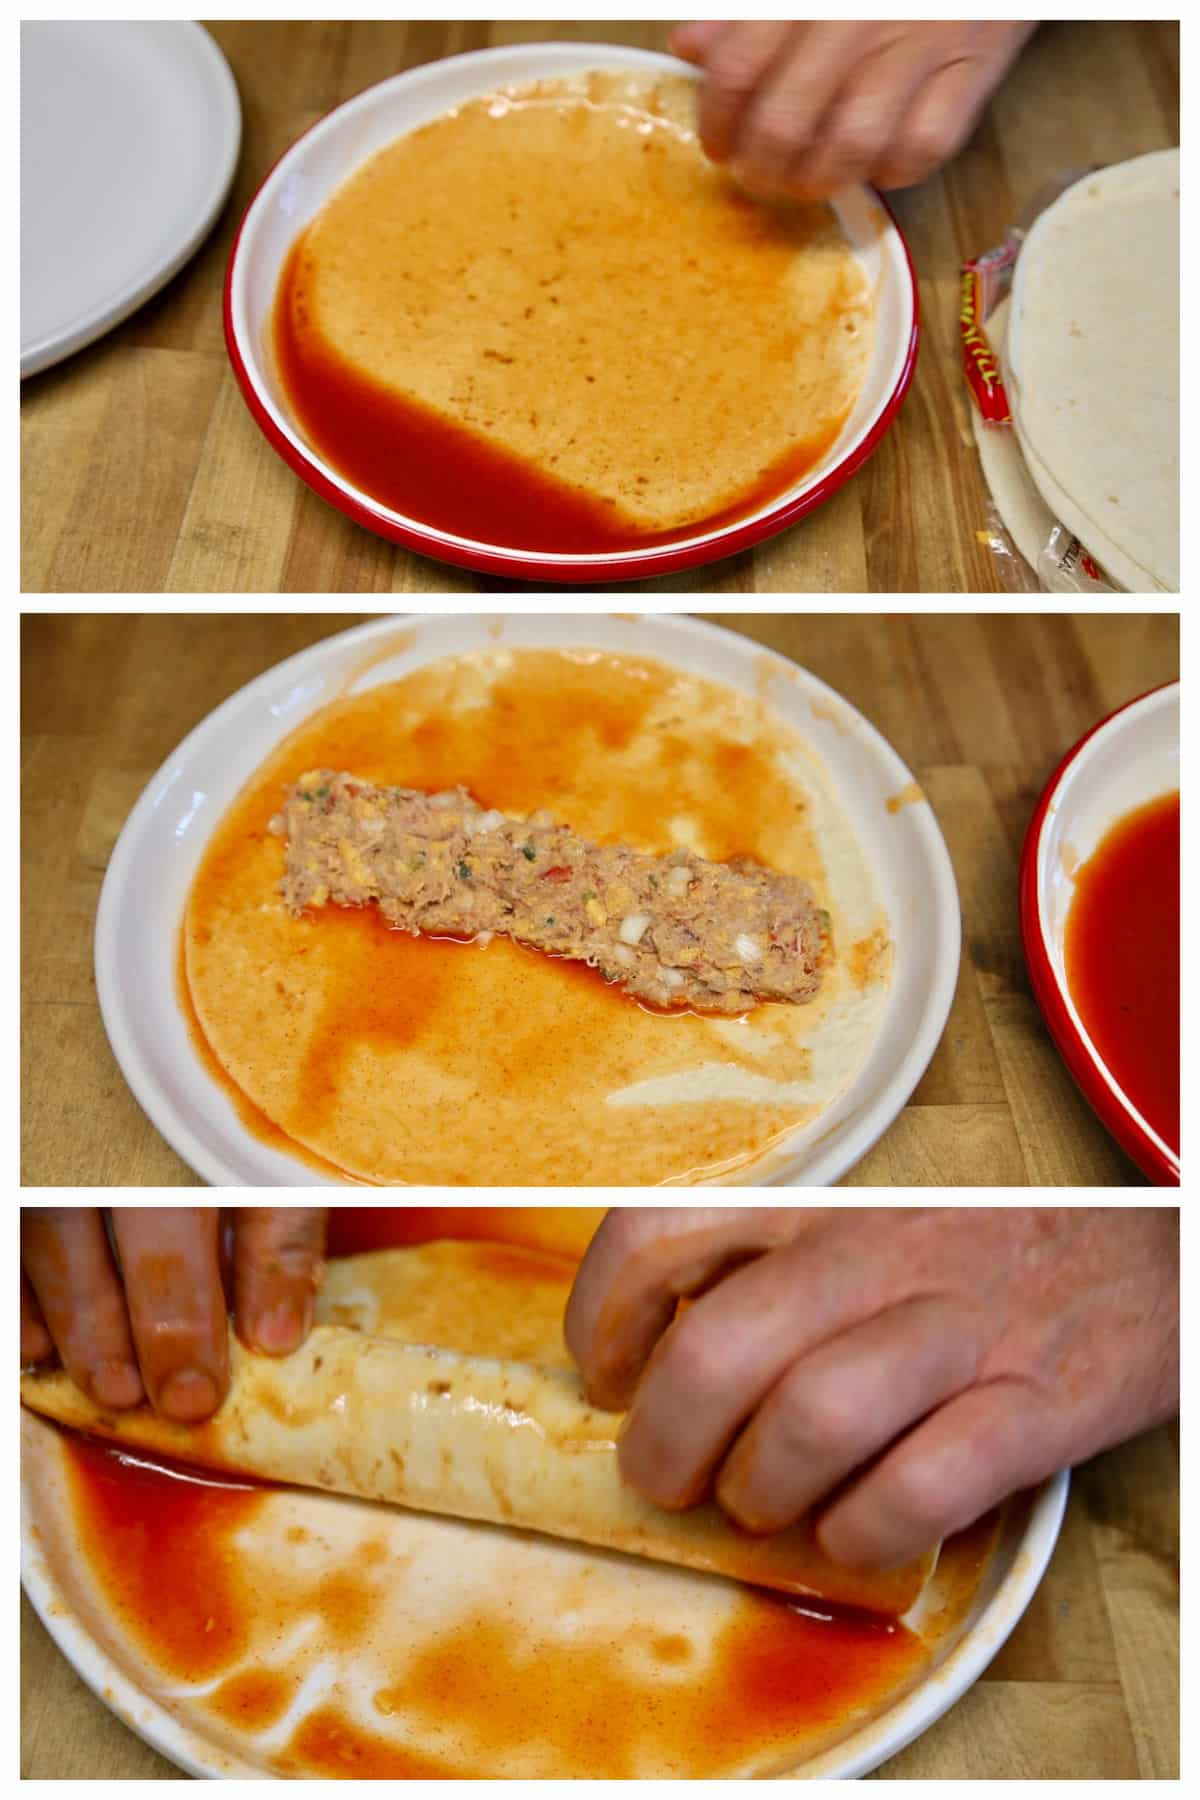 Collage filling tortillas with pork, rolling into enchiladas with sauce.